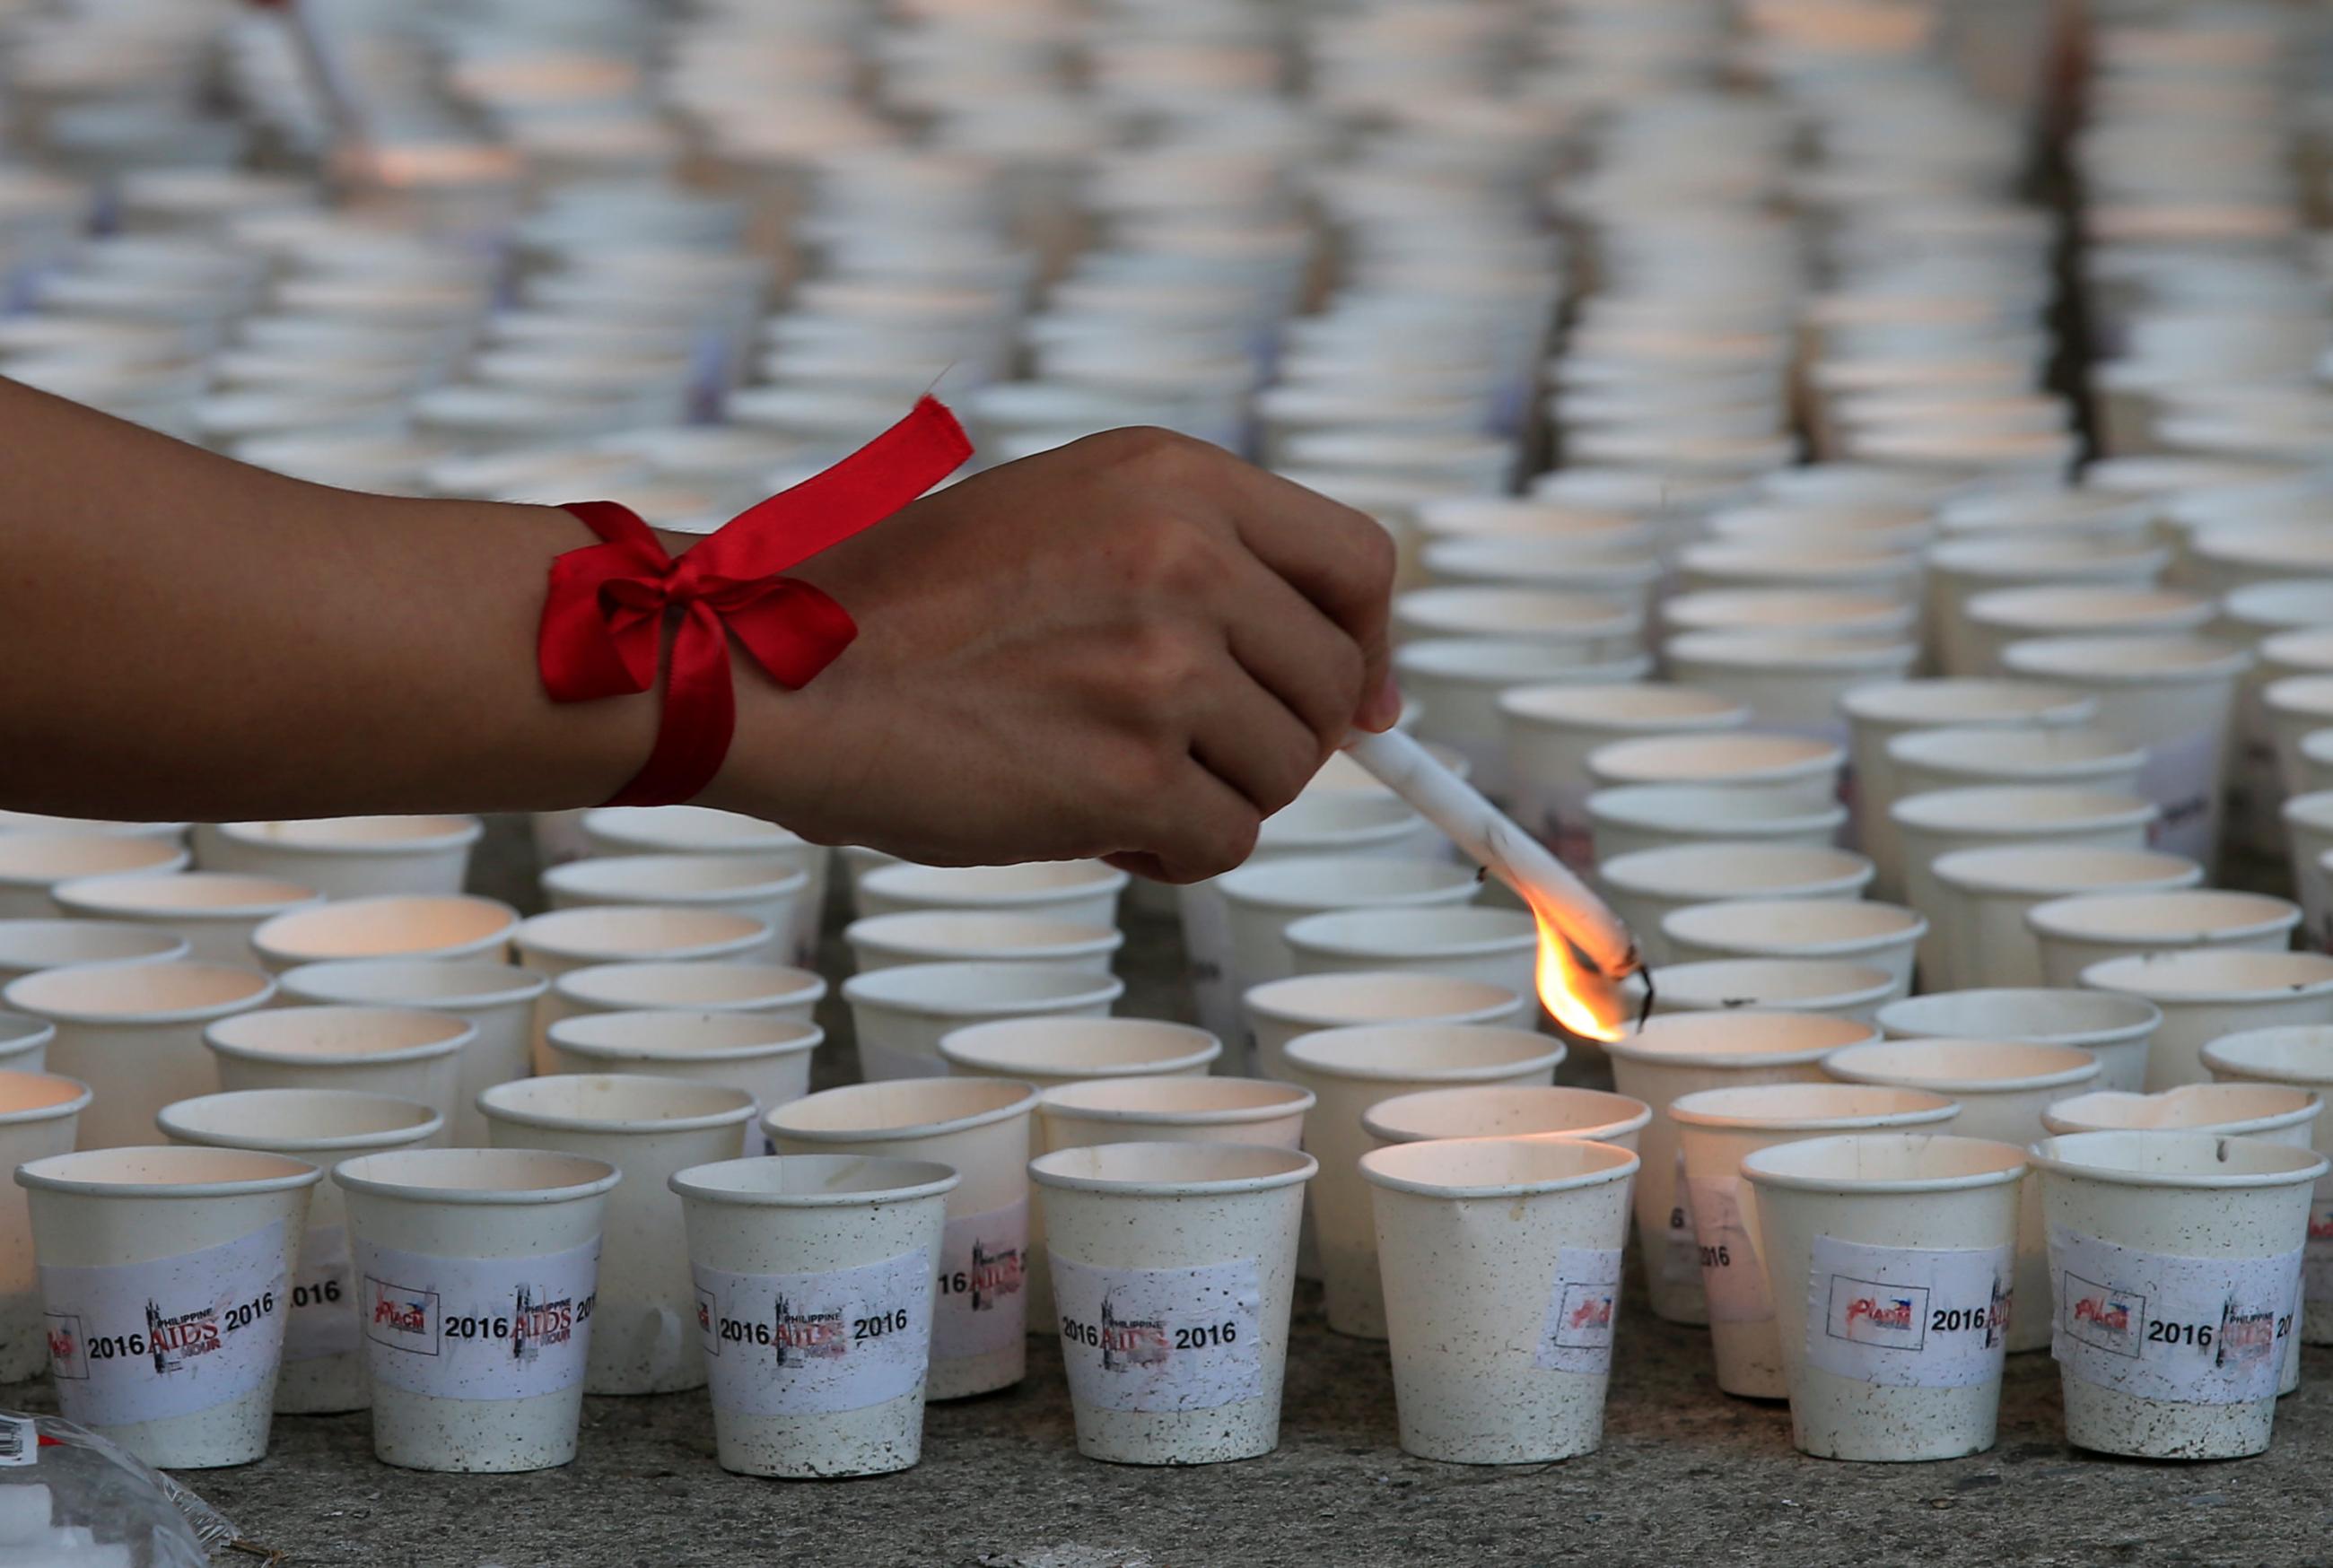 A supporter lights some of the 1,638 candles representing the number of lives lost due to HIV/AIDS in the Philippines. Photo taken on International AIDS Candlelight Memorial Day in Quezon City, Philippines on May 14, 2016. REUTERS/Romeo Ranoco